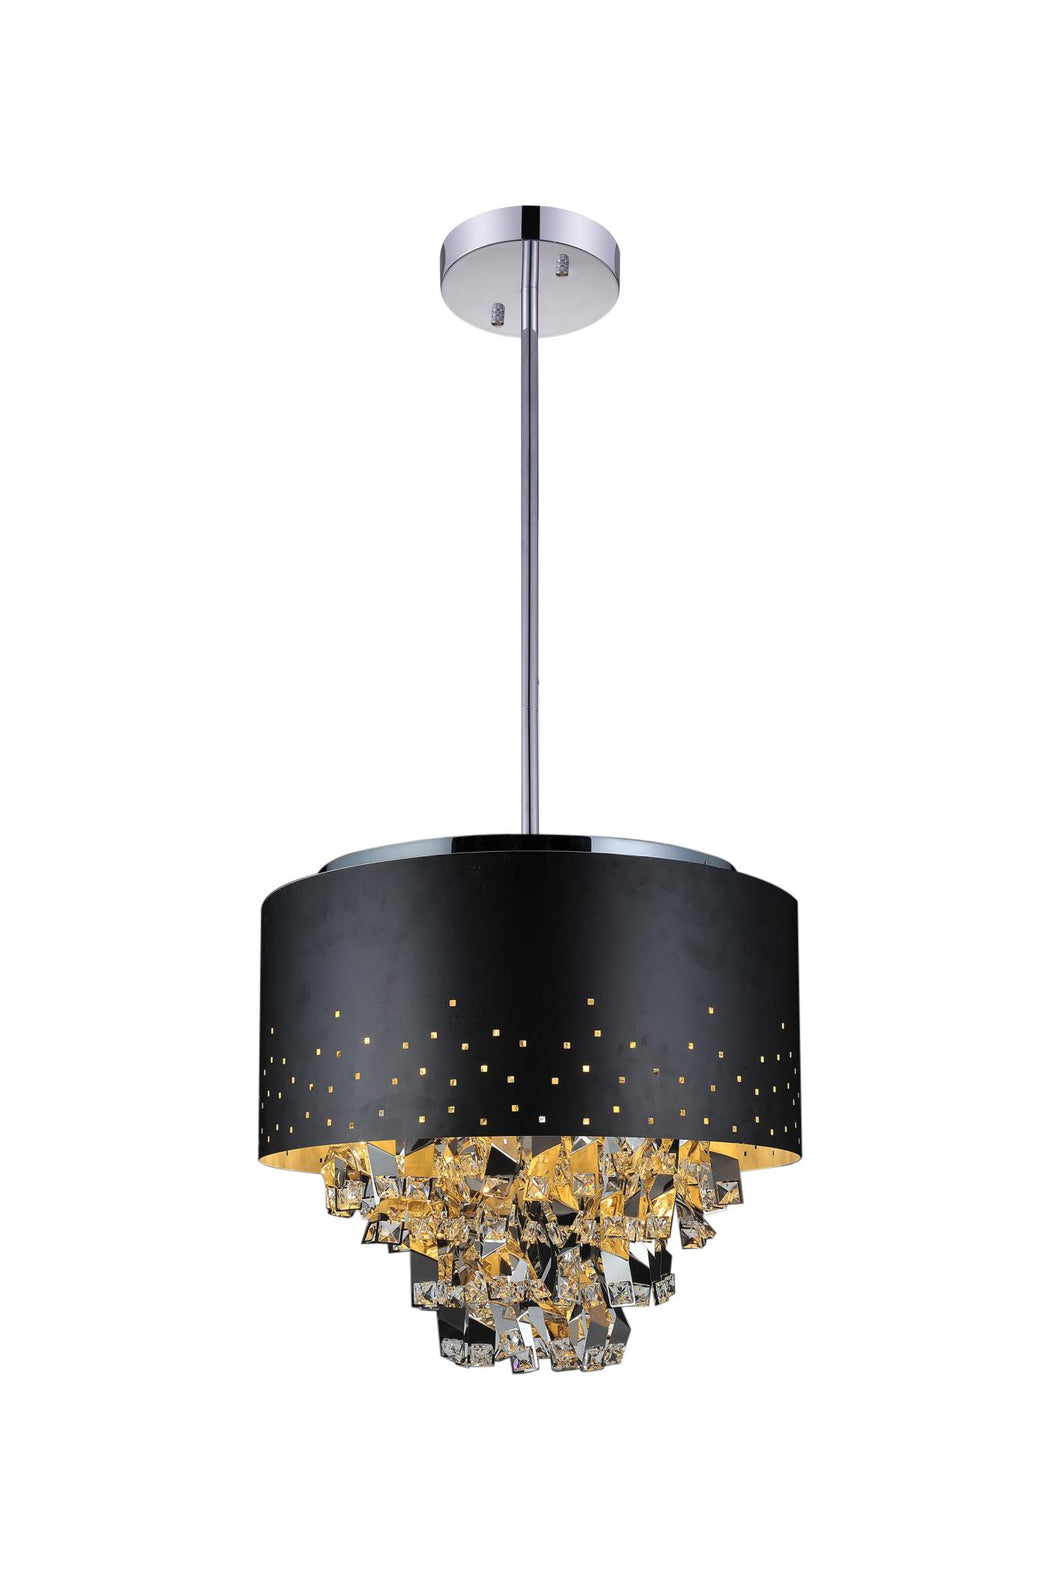 6 Light Drum Shade Chandelier with Black finish